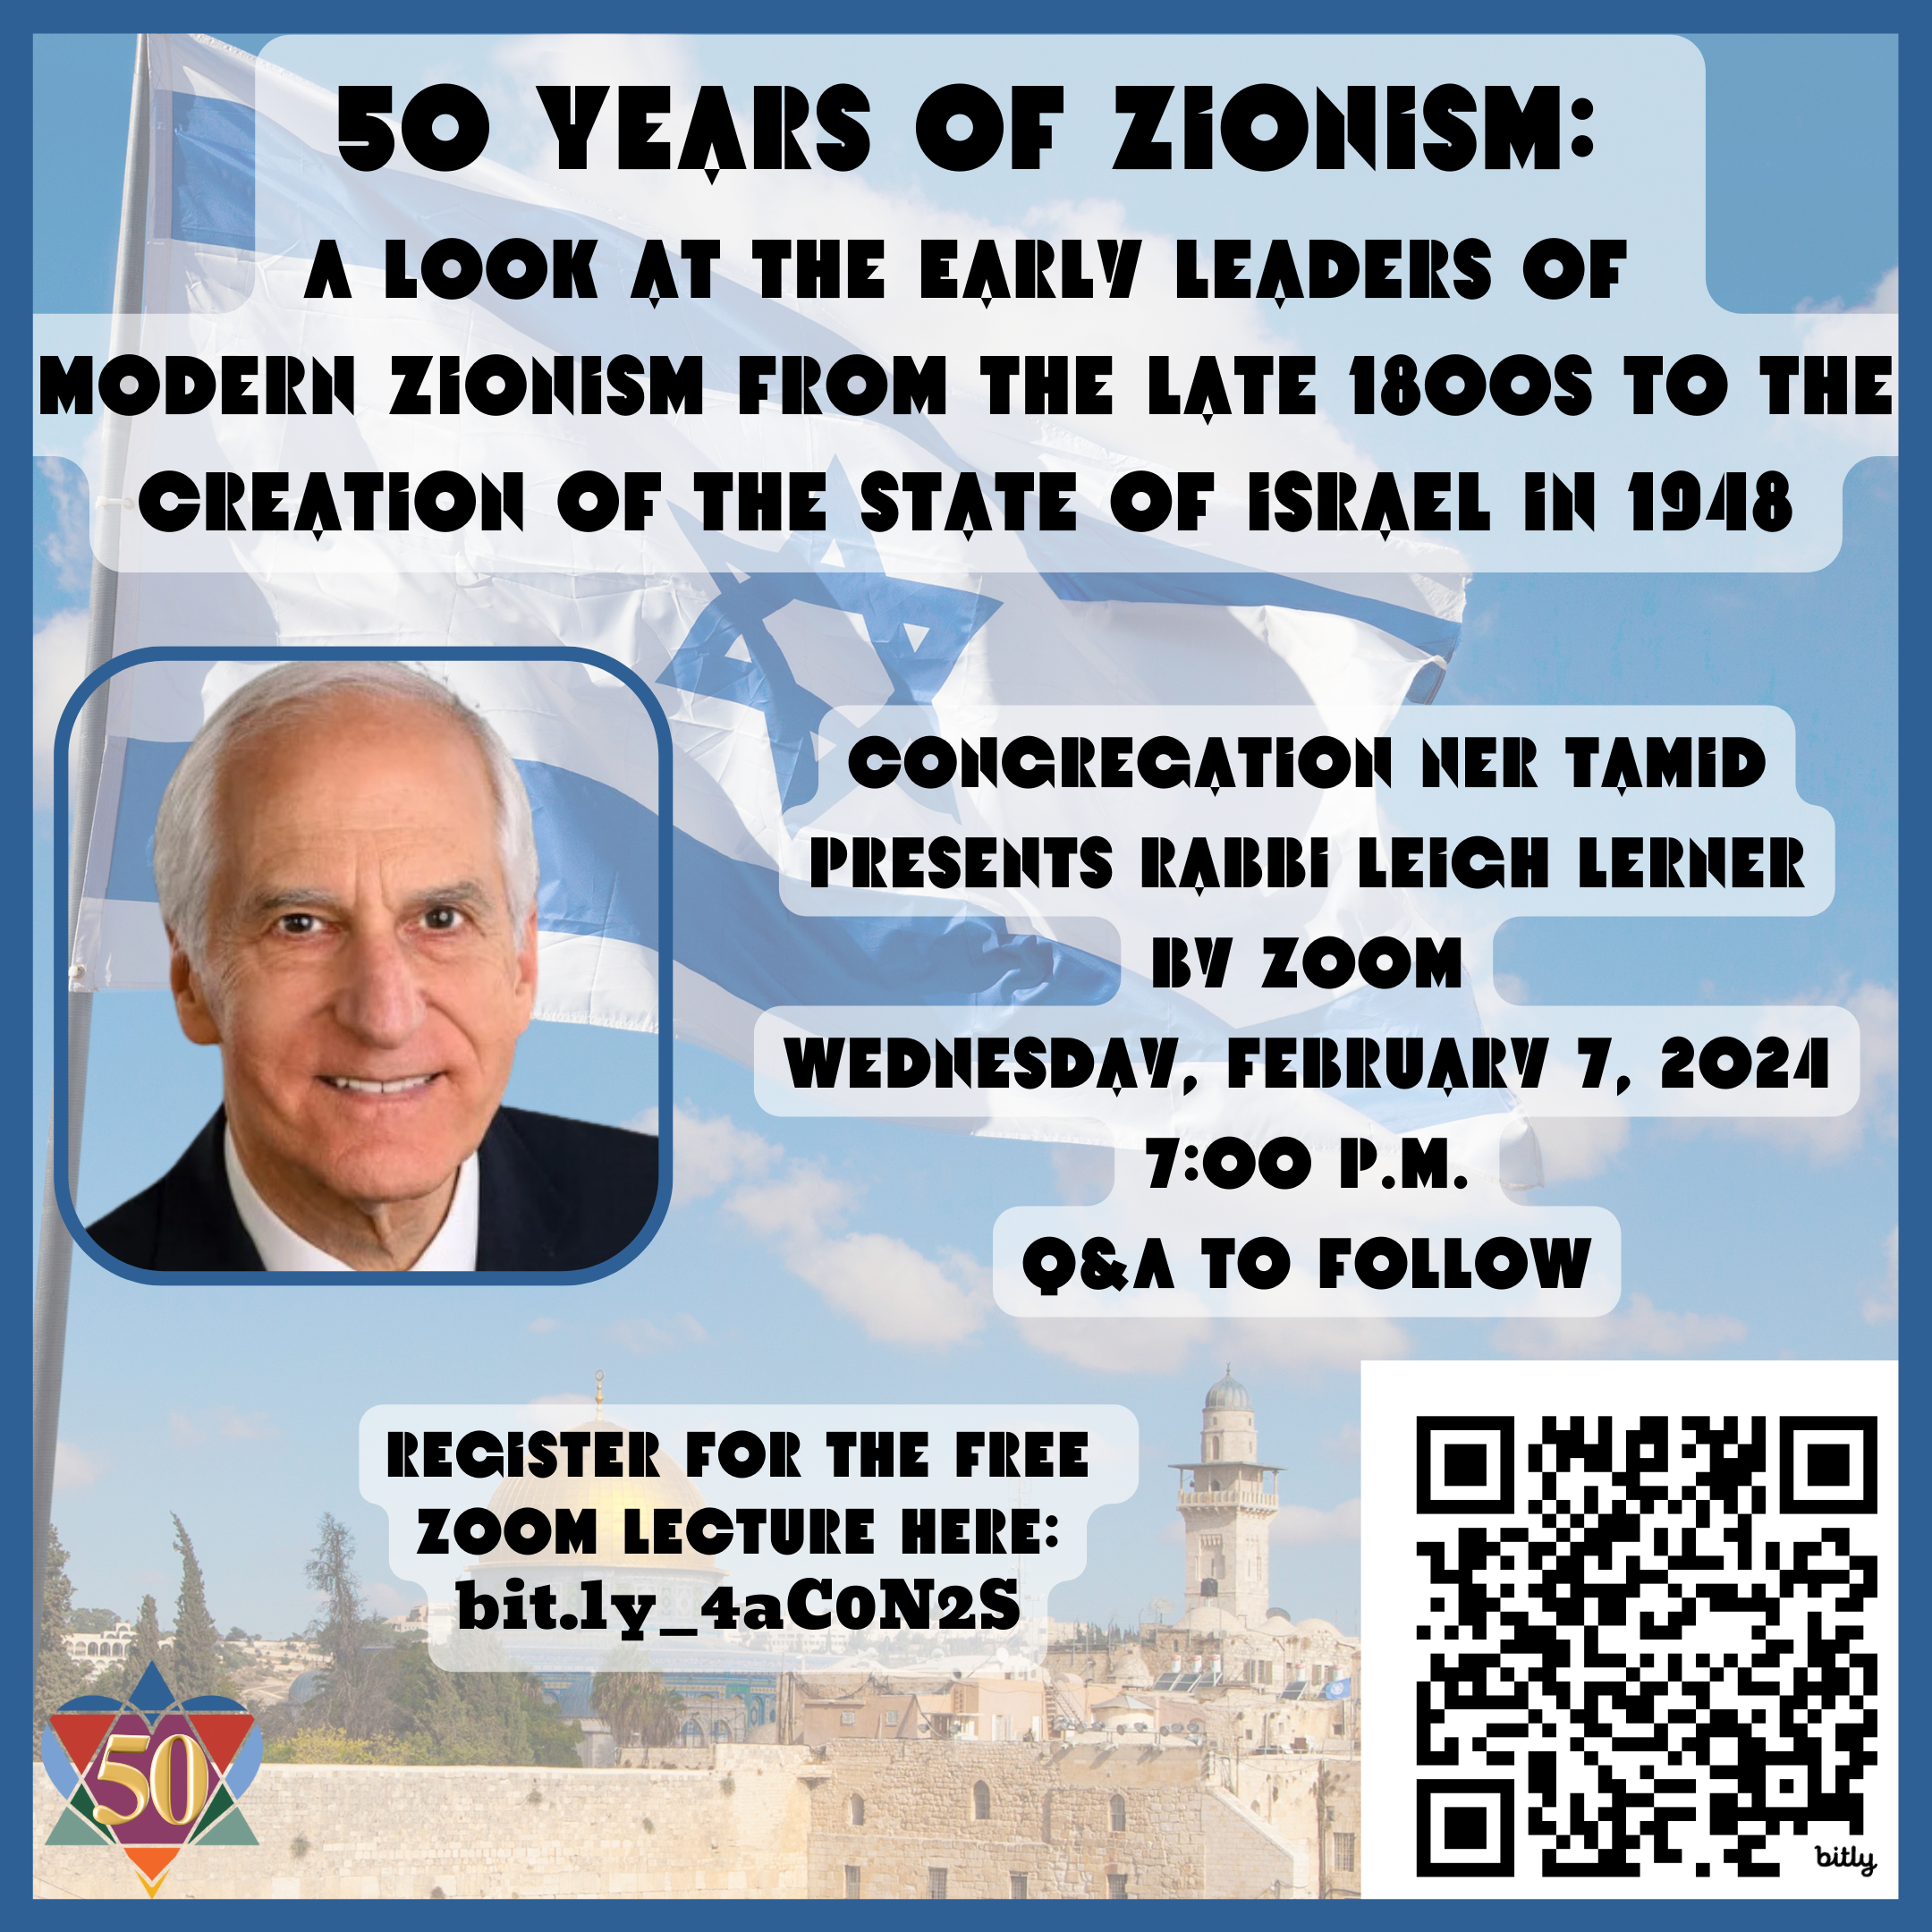 '50 YEARS OF ZIONISM' ADULT EDUCATION ZOOM WITH RABBI LERNER